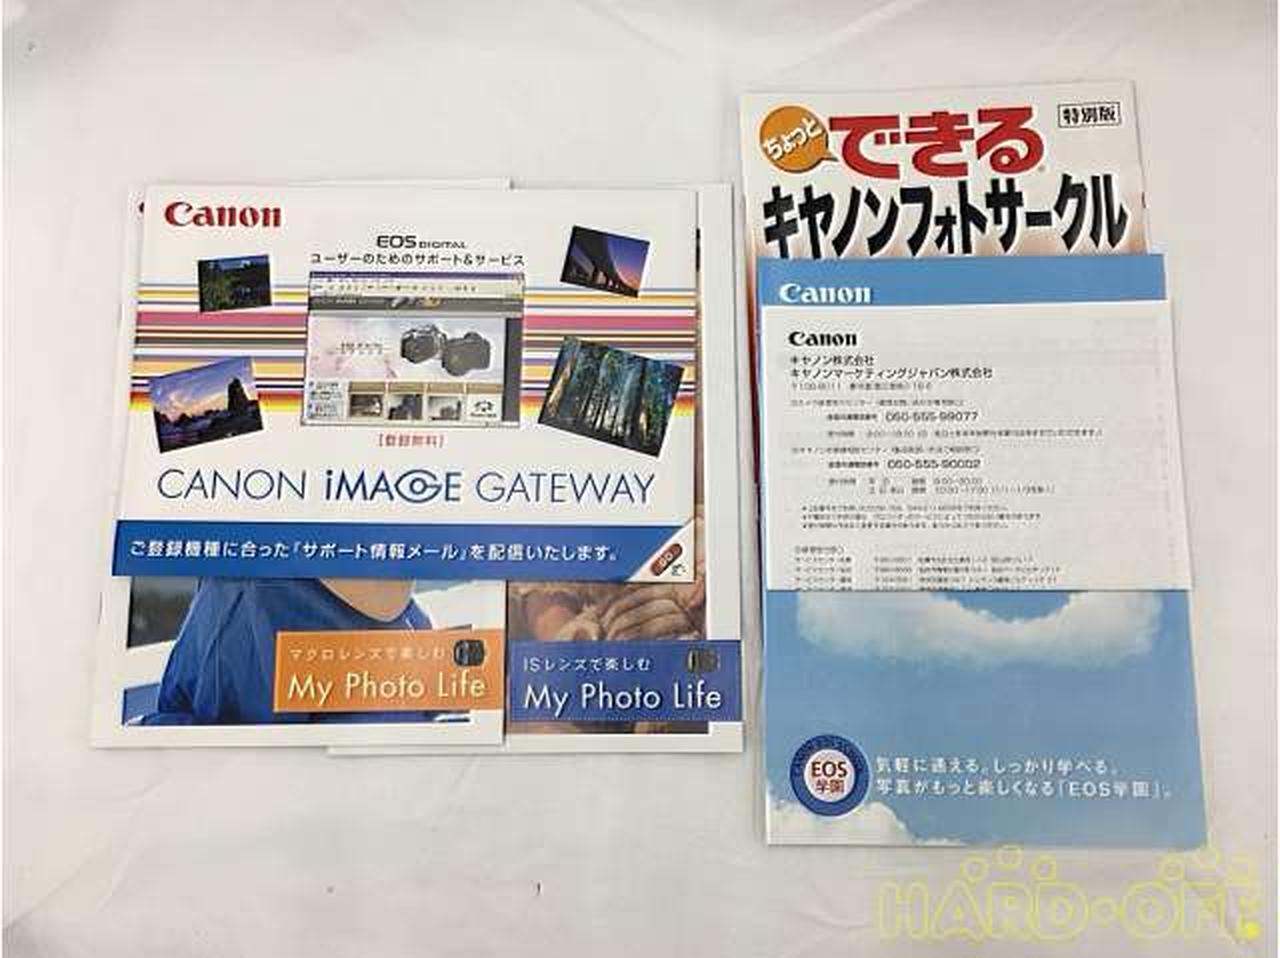 Canon model number: EOS KISS X3 double zoom kit Used in Japan